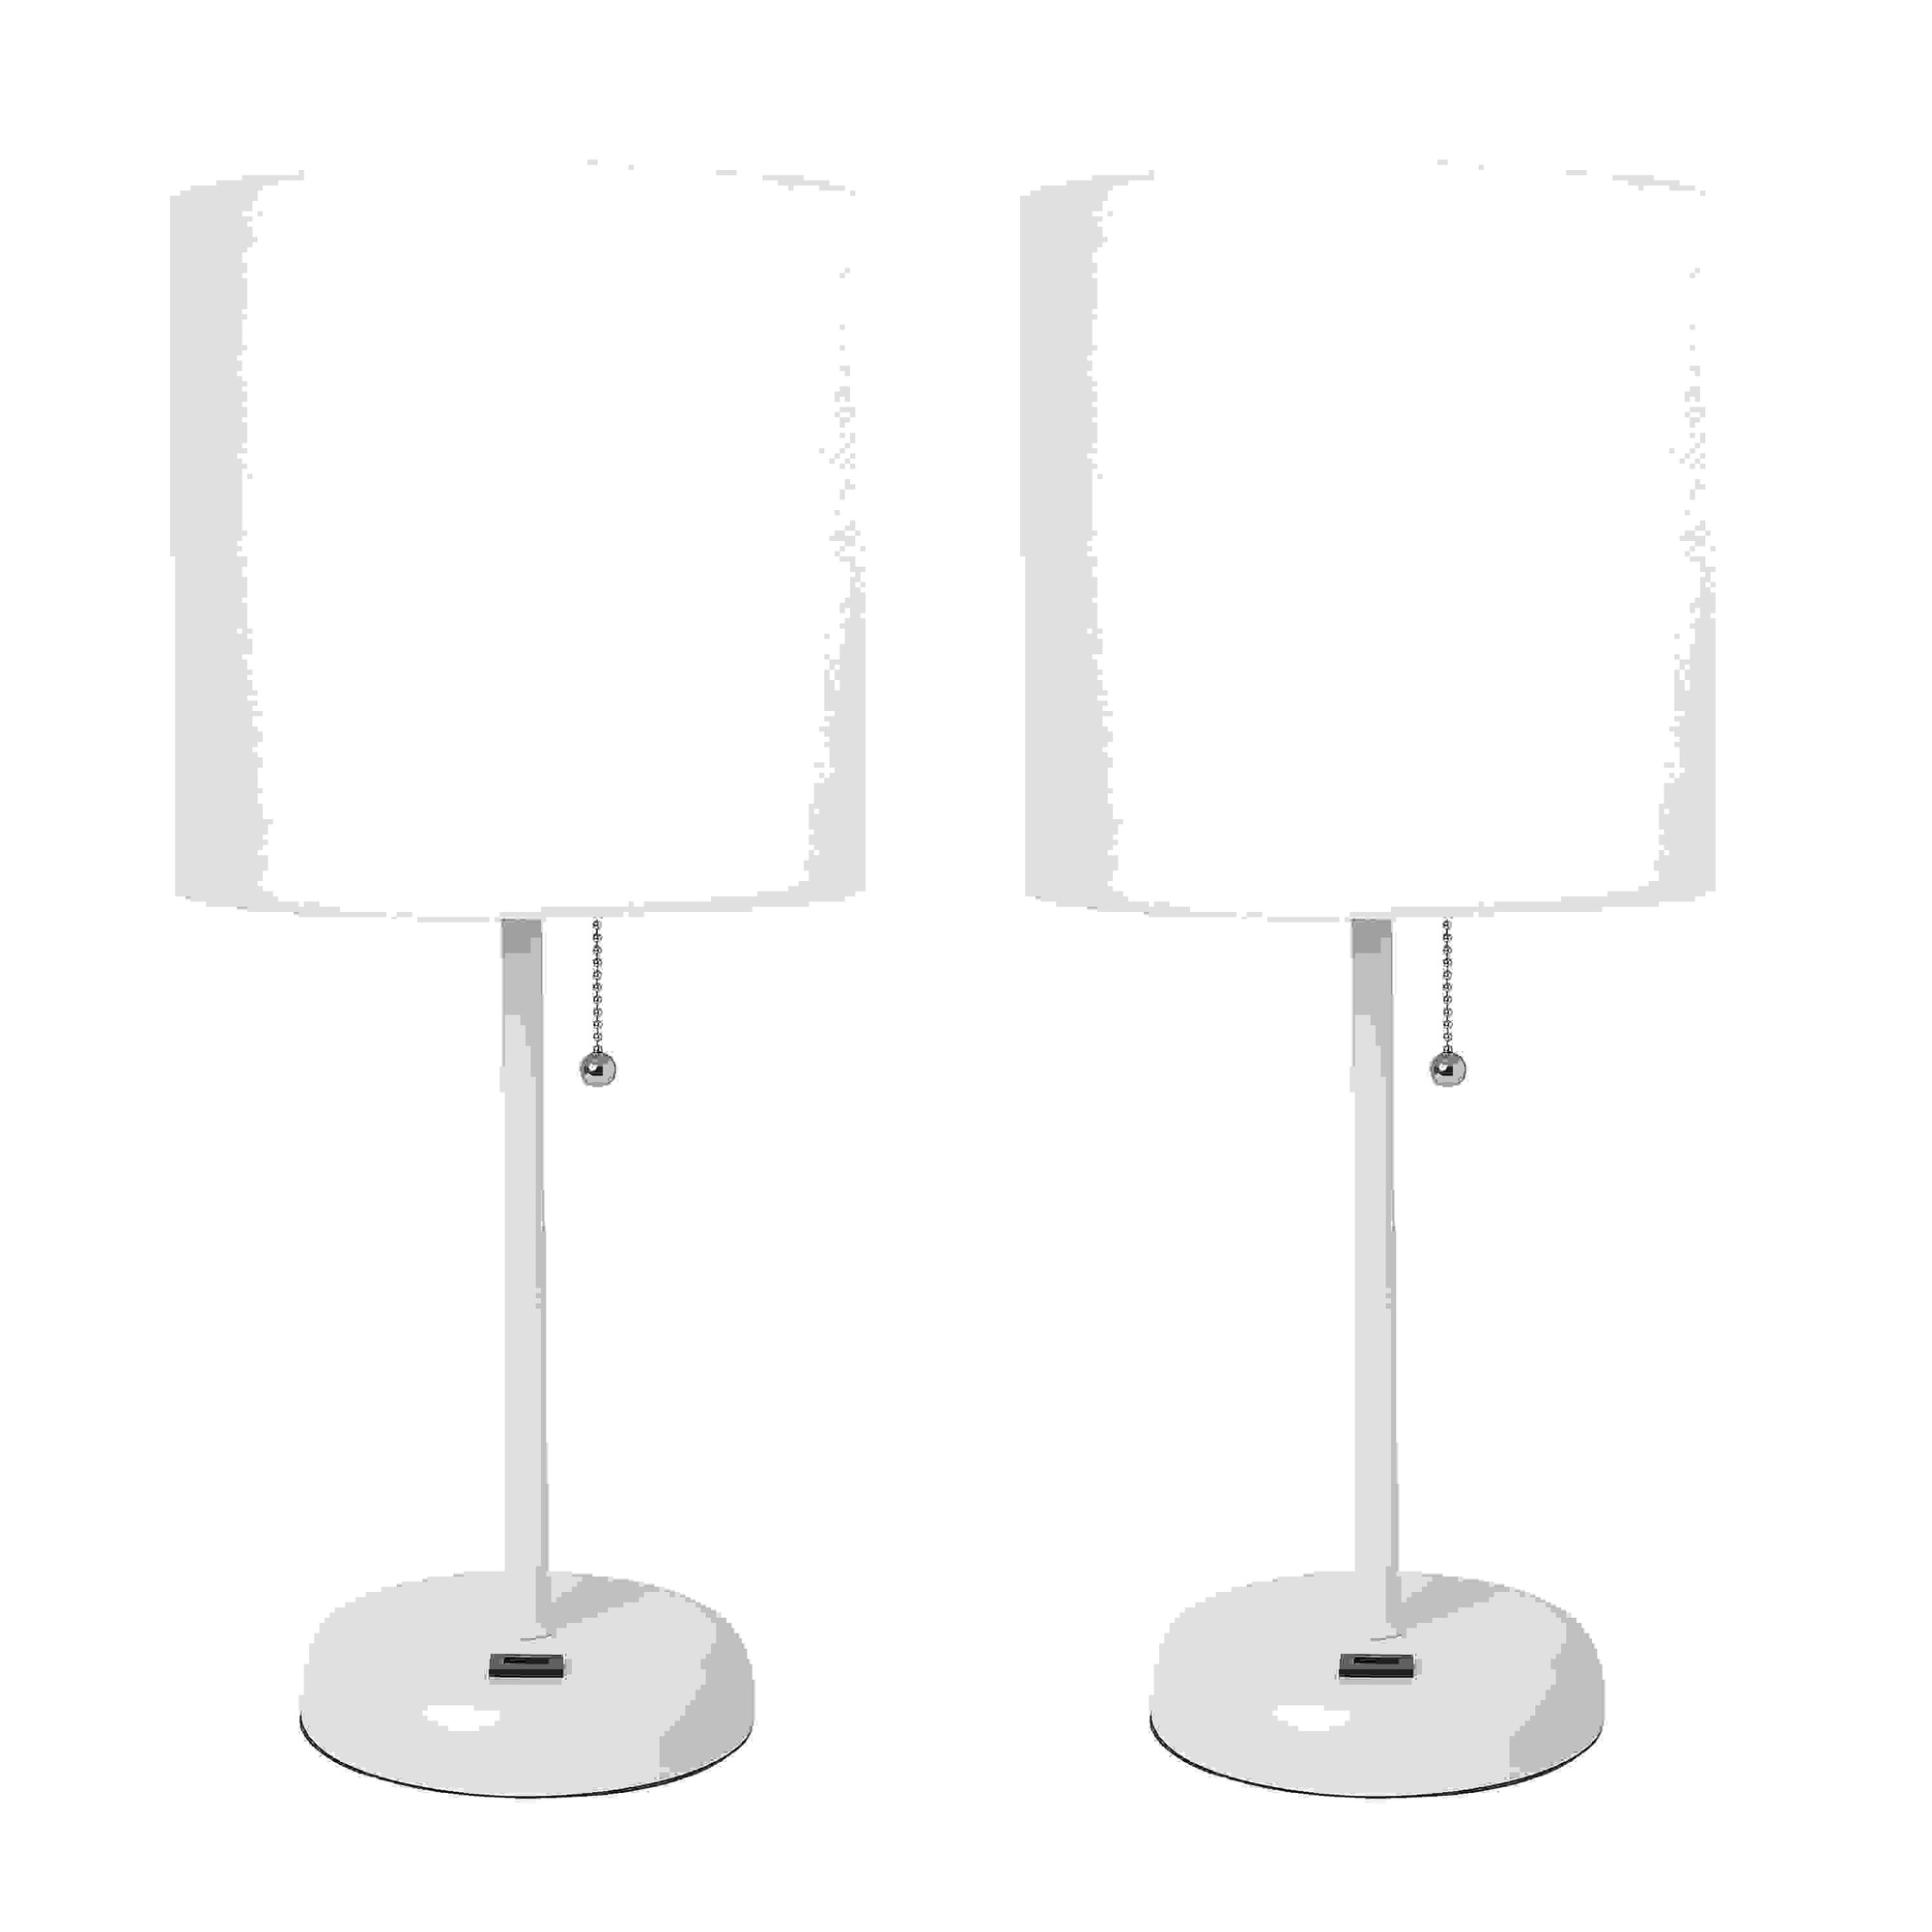 LimeLights White Stick Lamp with USB charging port and Fabric Shade 2 Pack Set, White